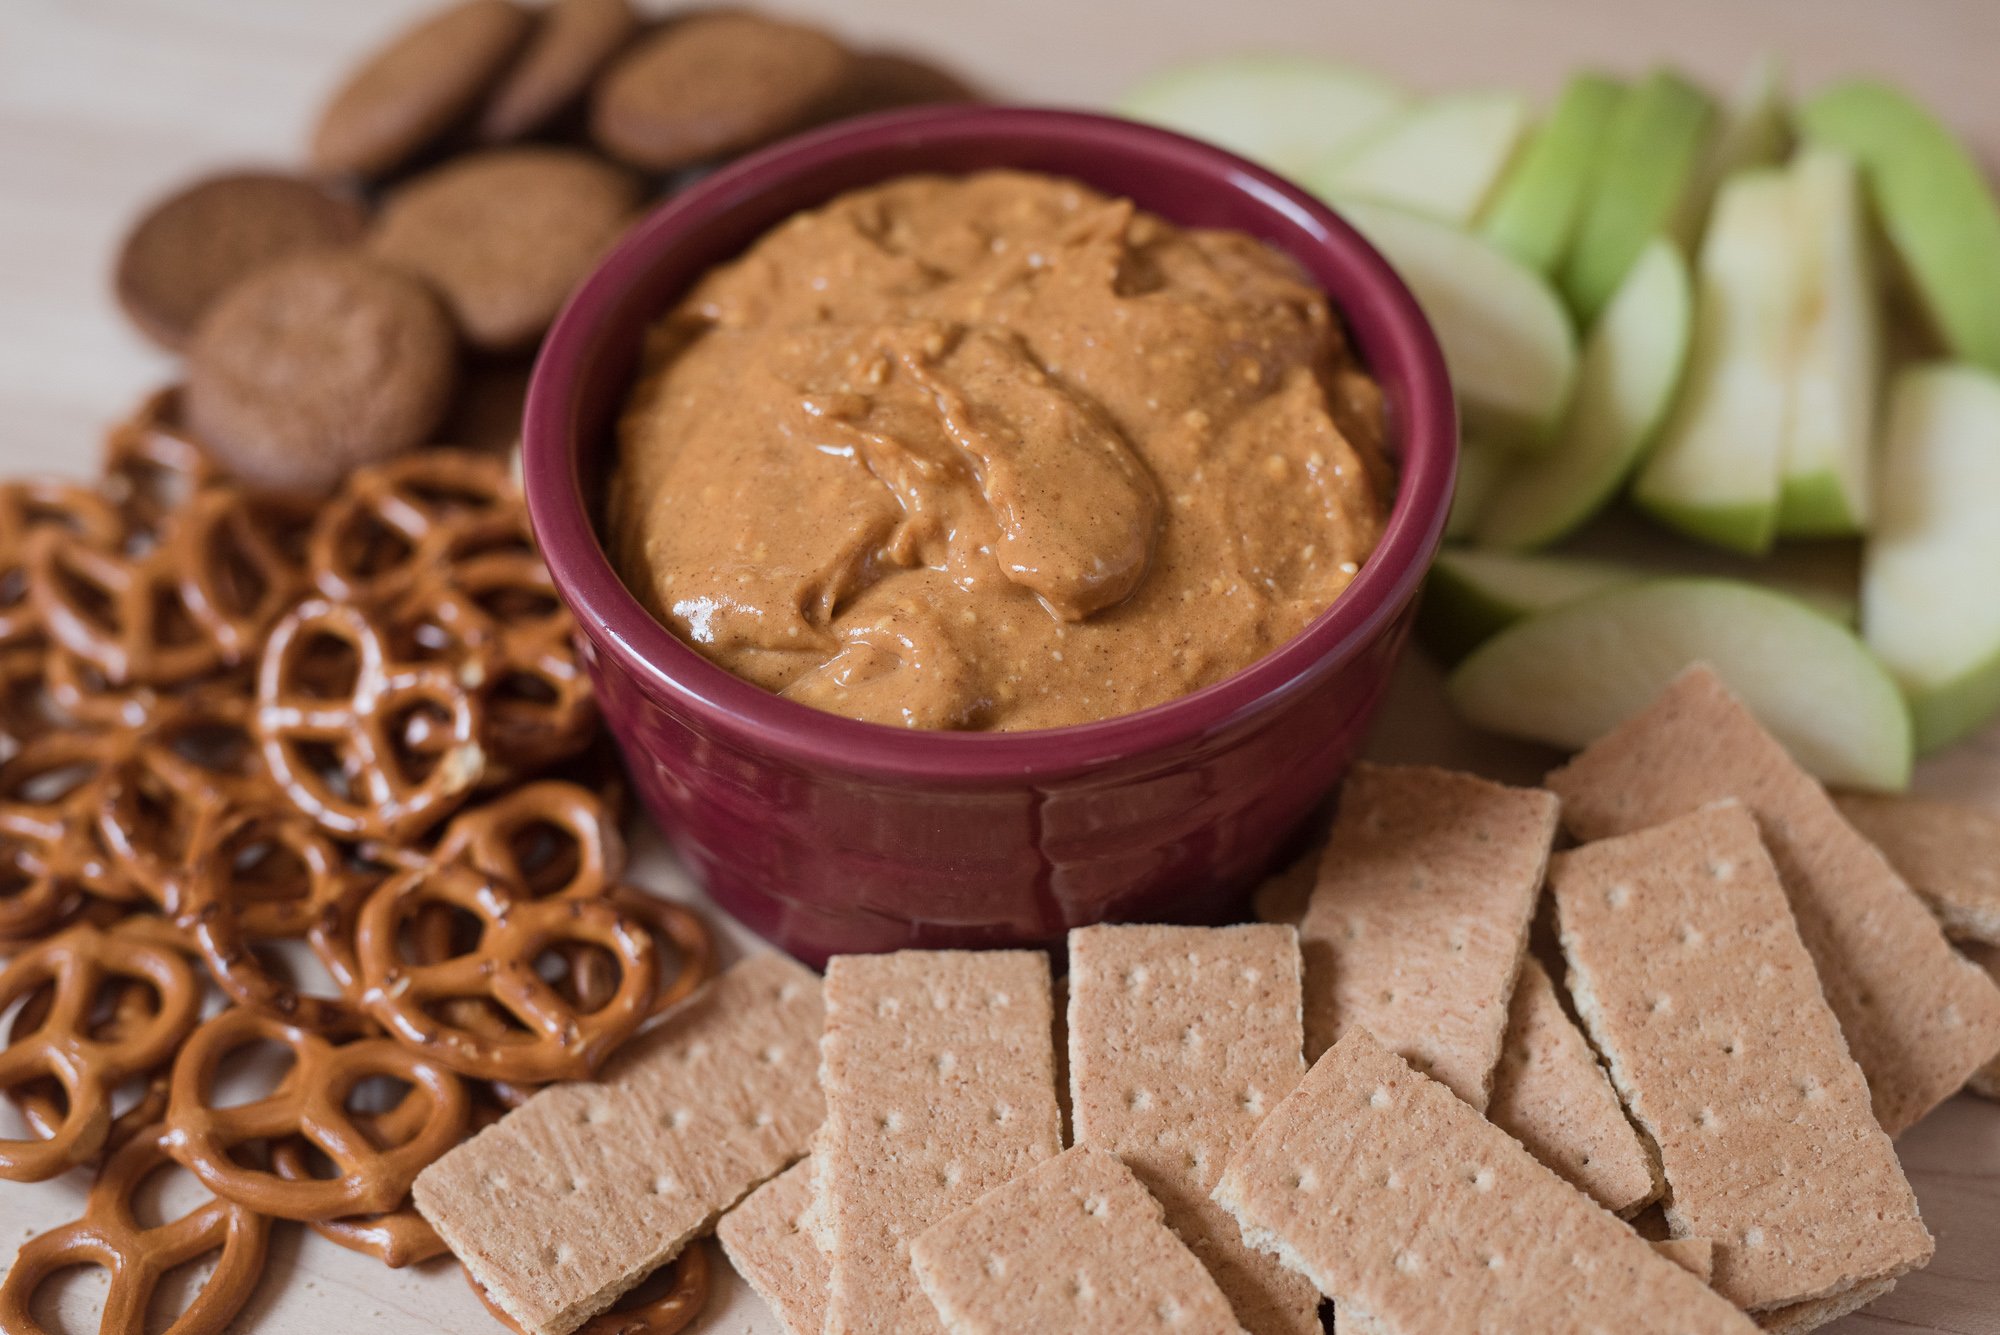 pumpkin dip on cutting board with ginger snaps, pretzels, apples and crackers